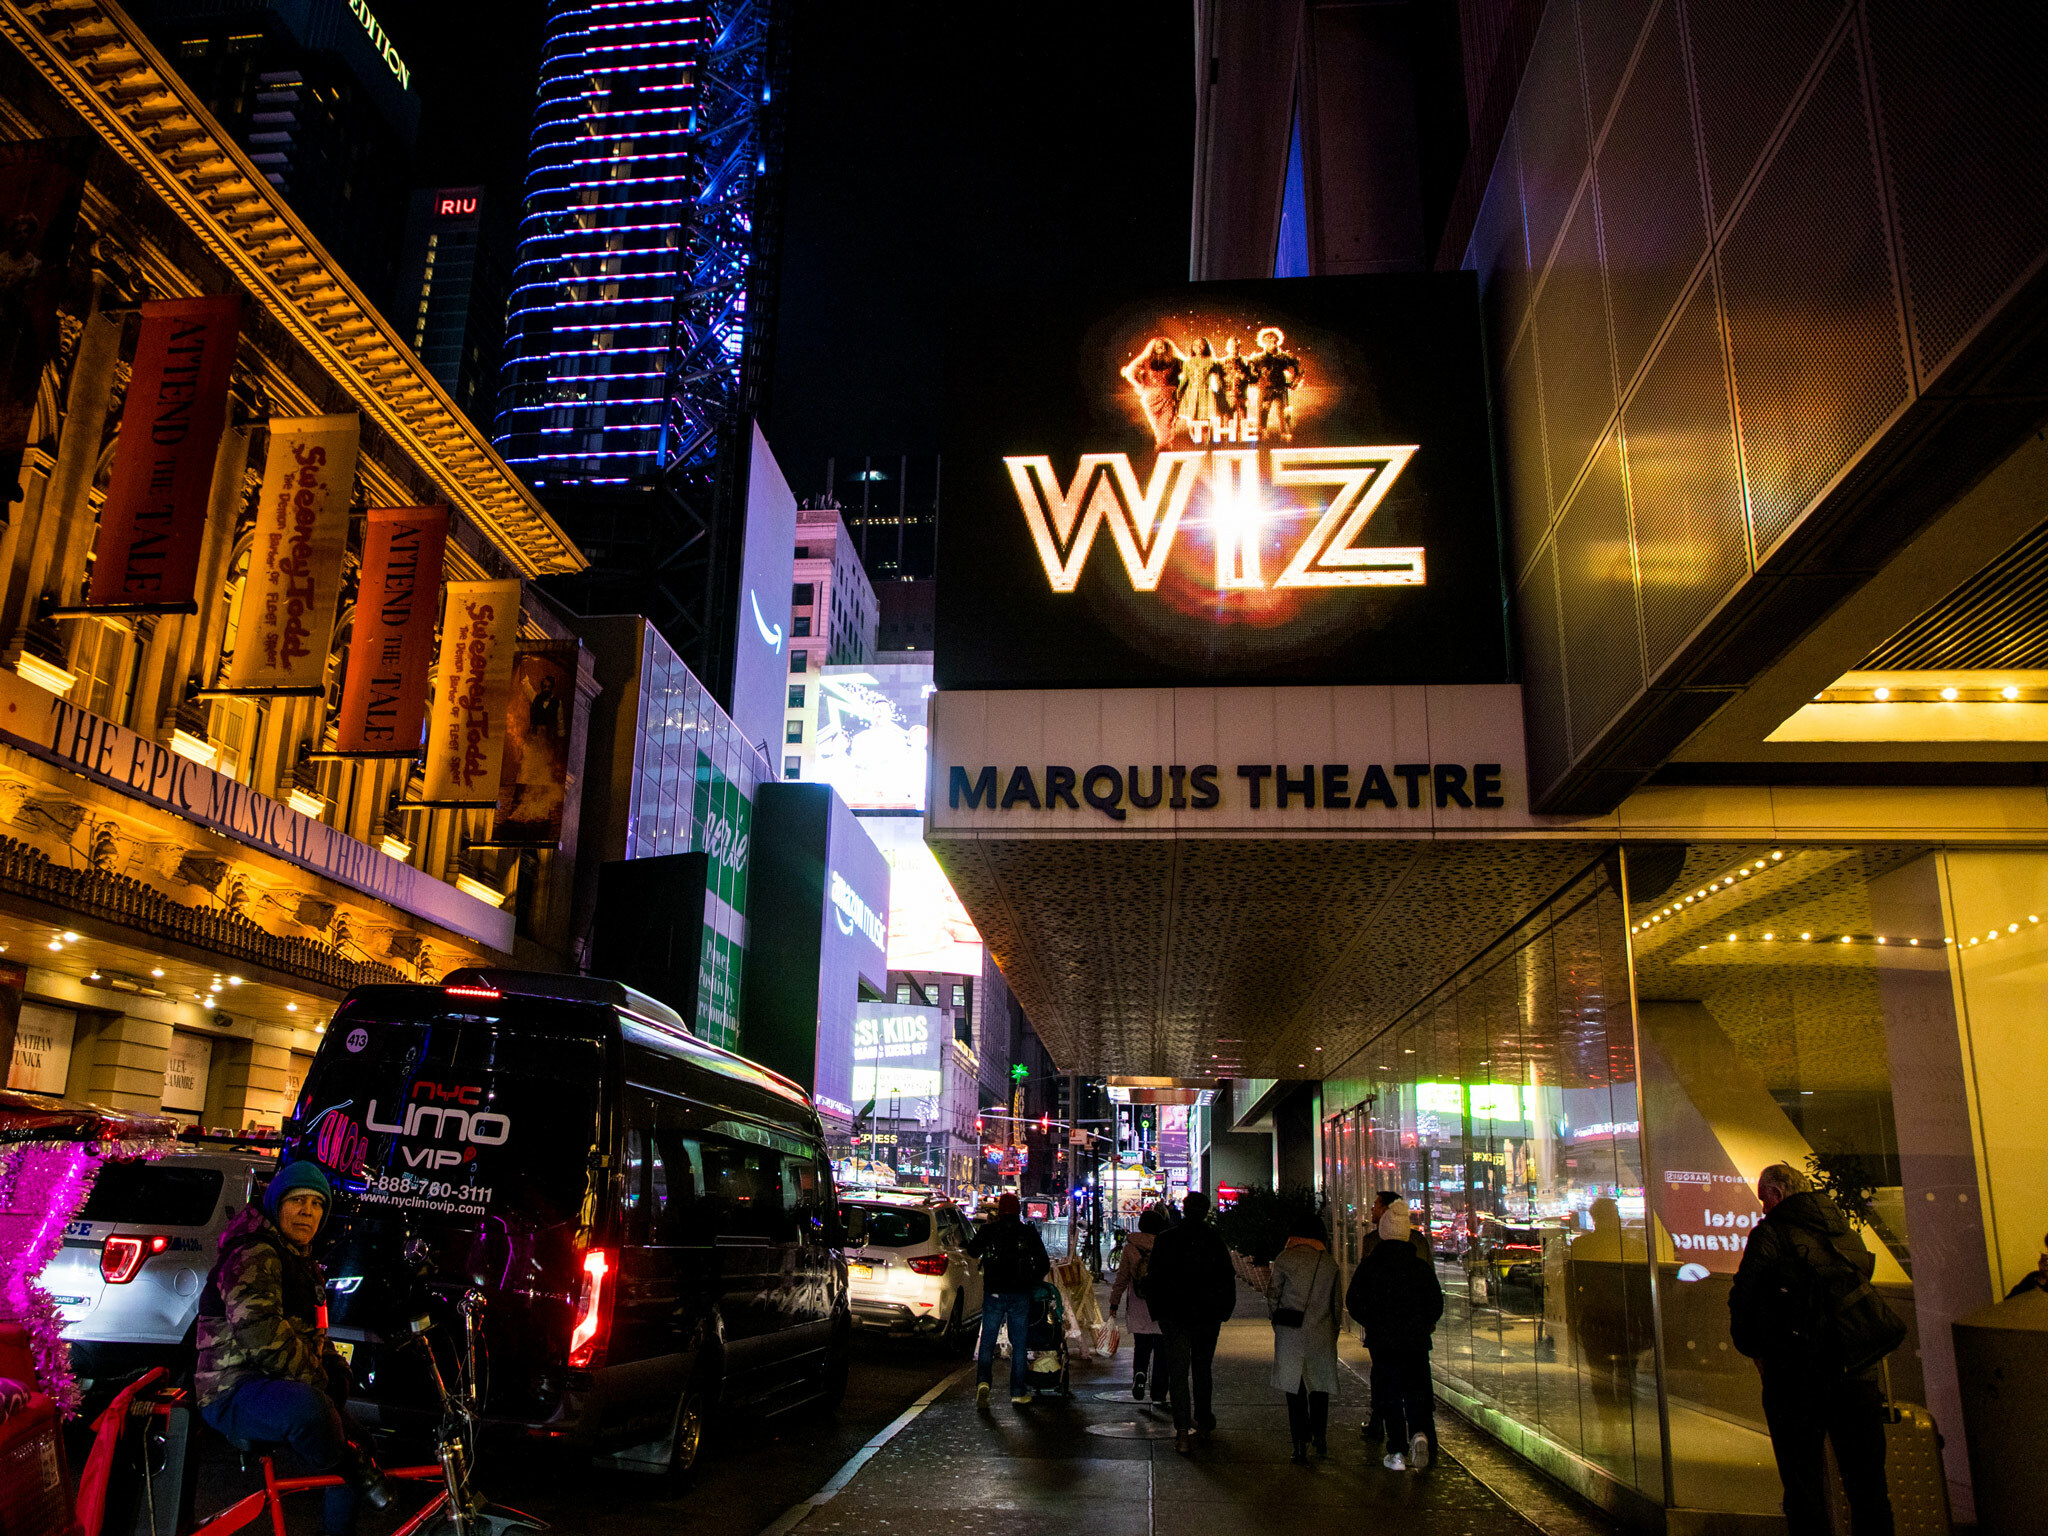 The Wiz Marquee